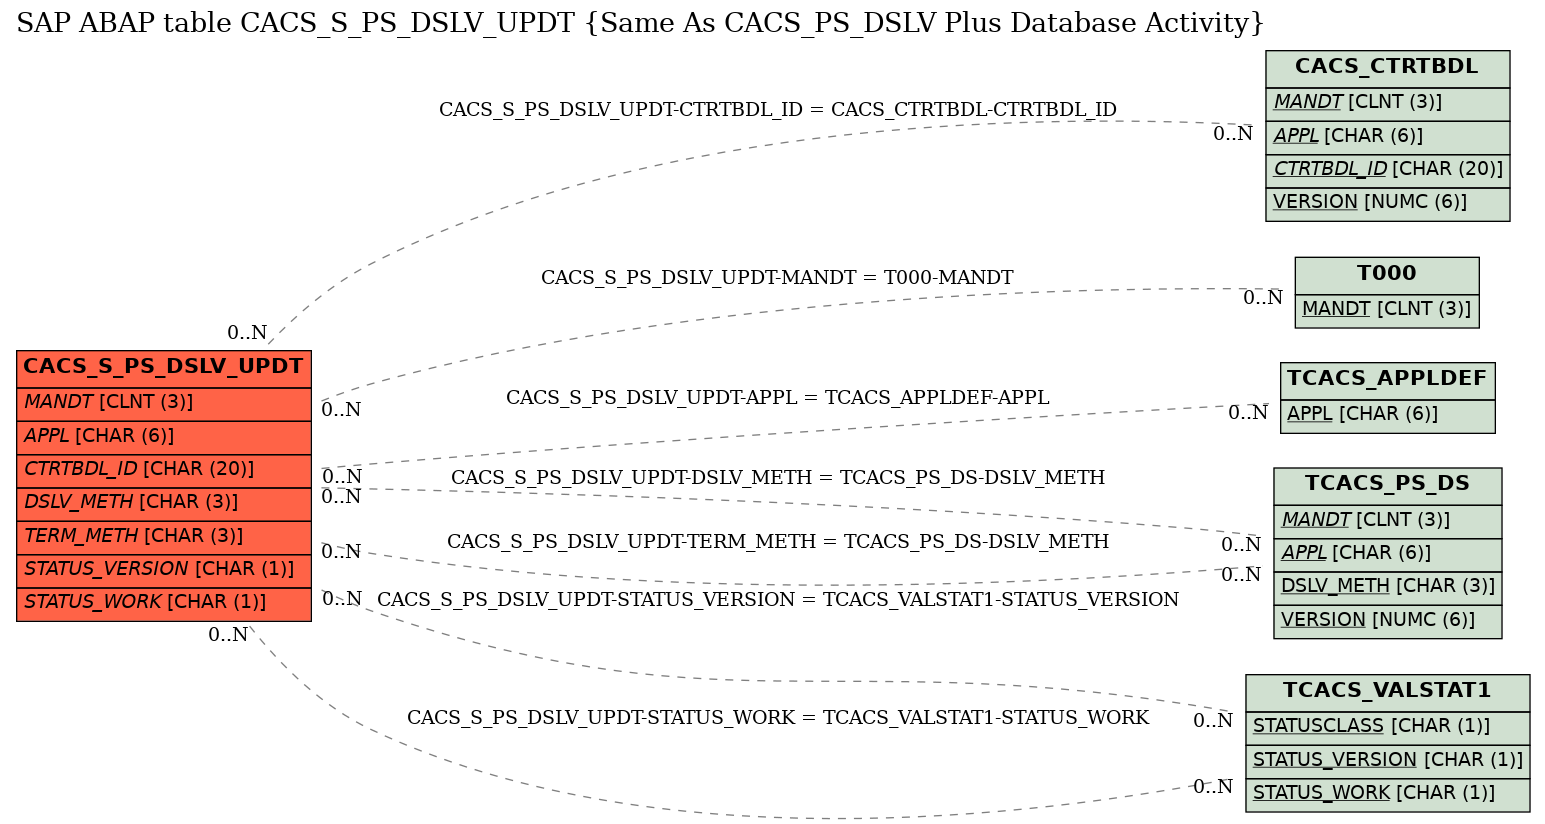 E-R Diagram for table CACS_S_PS_DSLV_UPDT (Same As CACS_PS_DSLV Plus Database Activity)